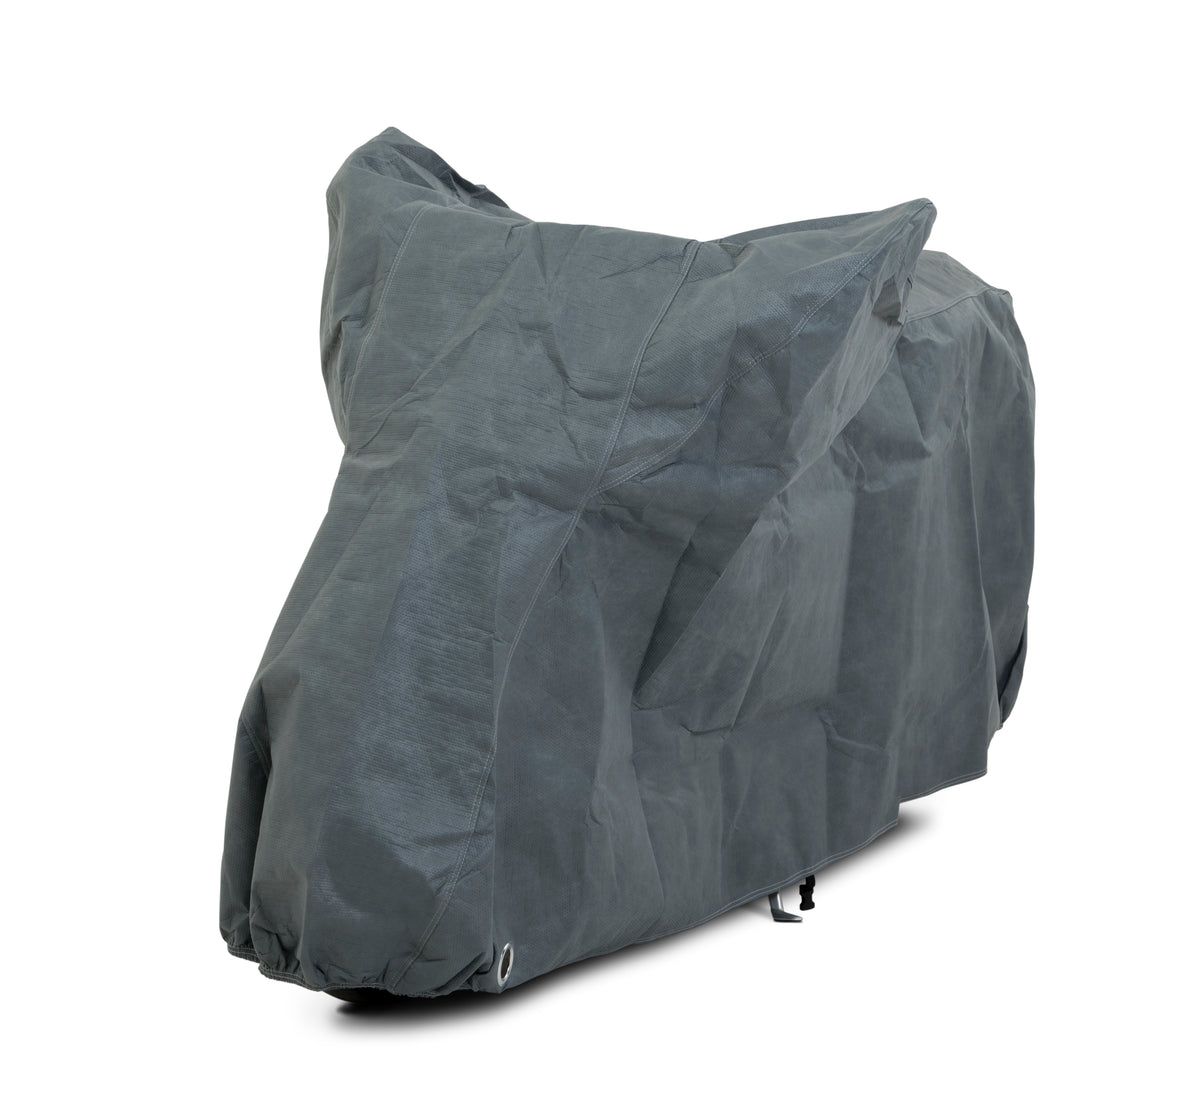 Stormforce best outdoor motorcycle covers for HARLEY DAVIDSON